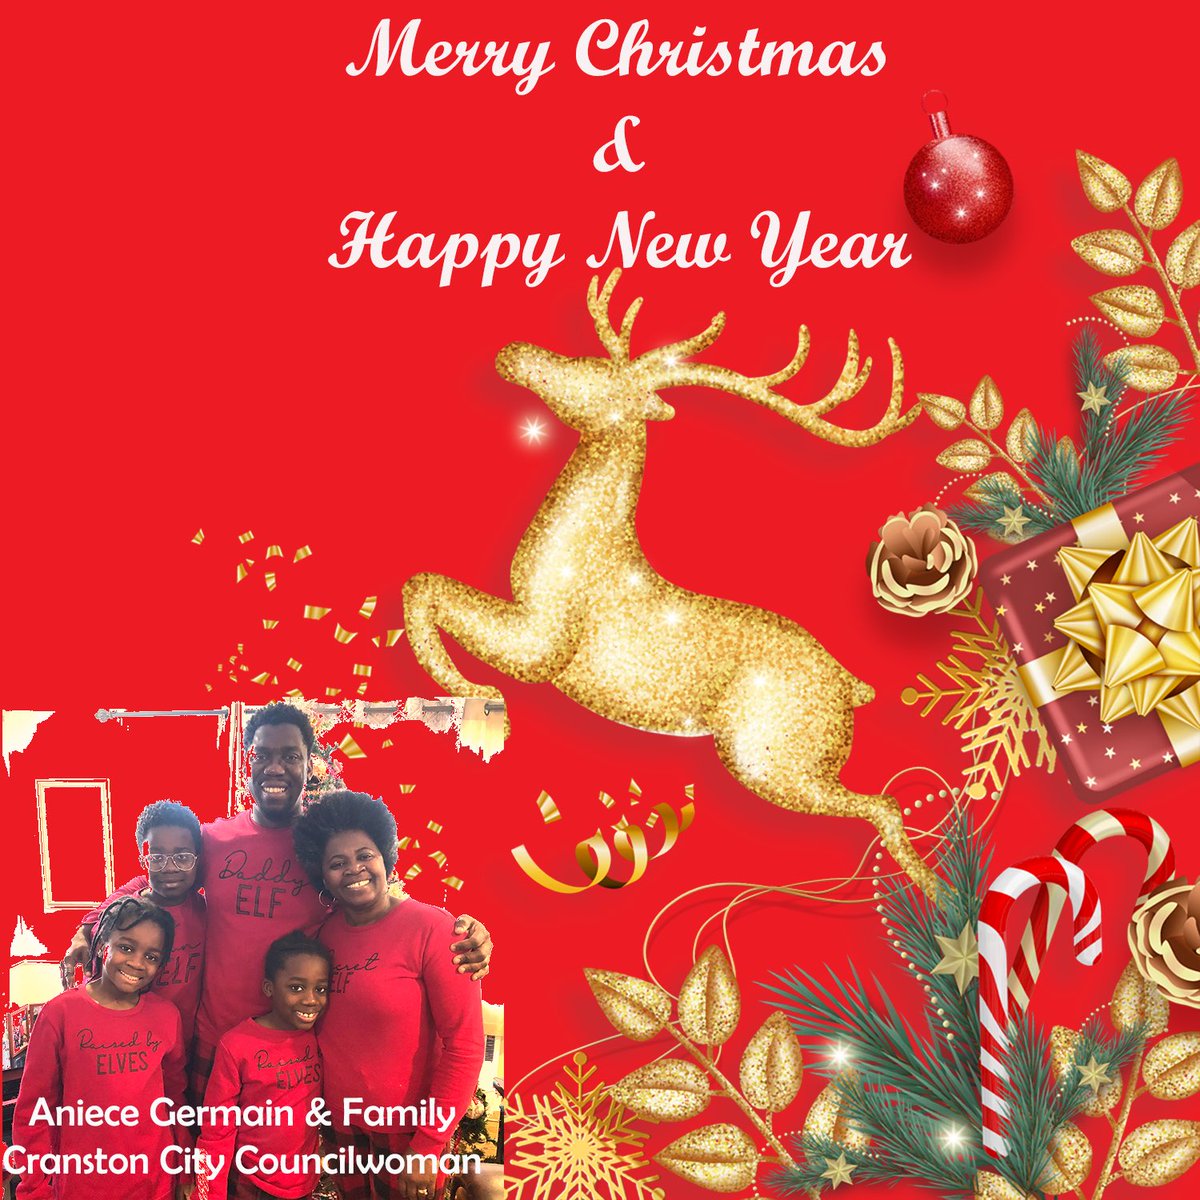 From my family to you and your family, I wish you all who celebrate a Merry Christmas and a Happy and peaceful New Year 2024!